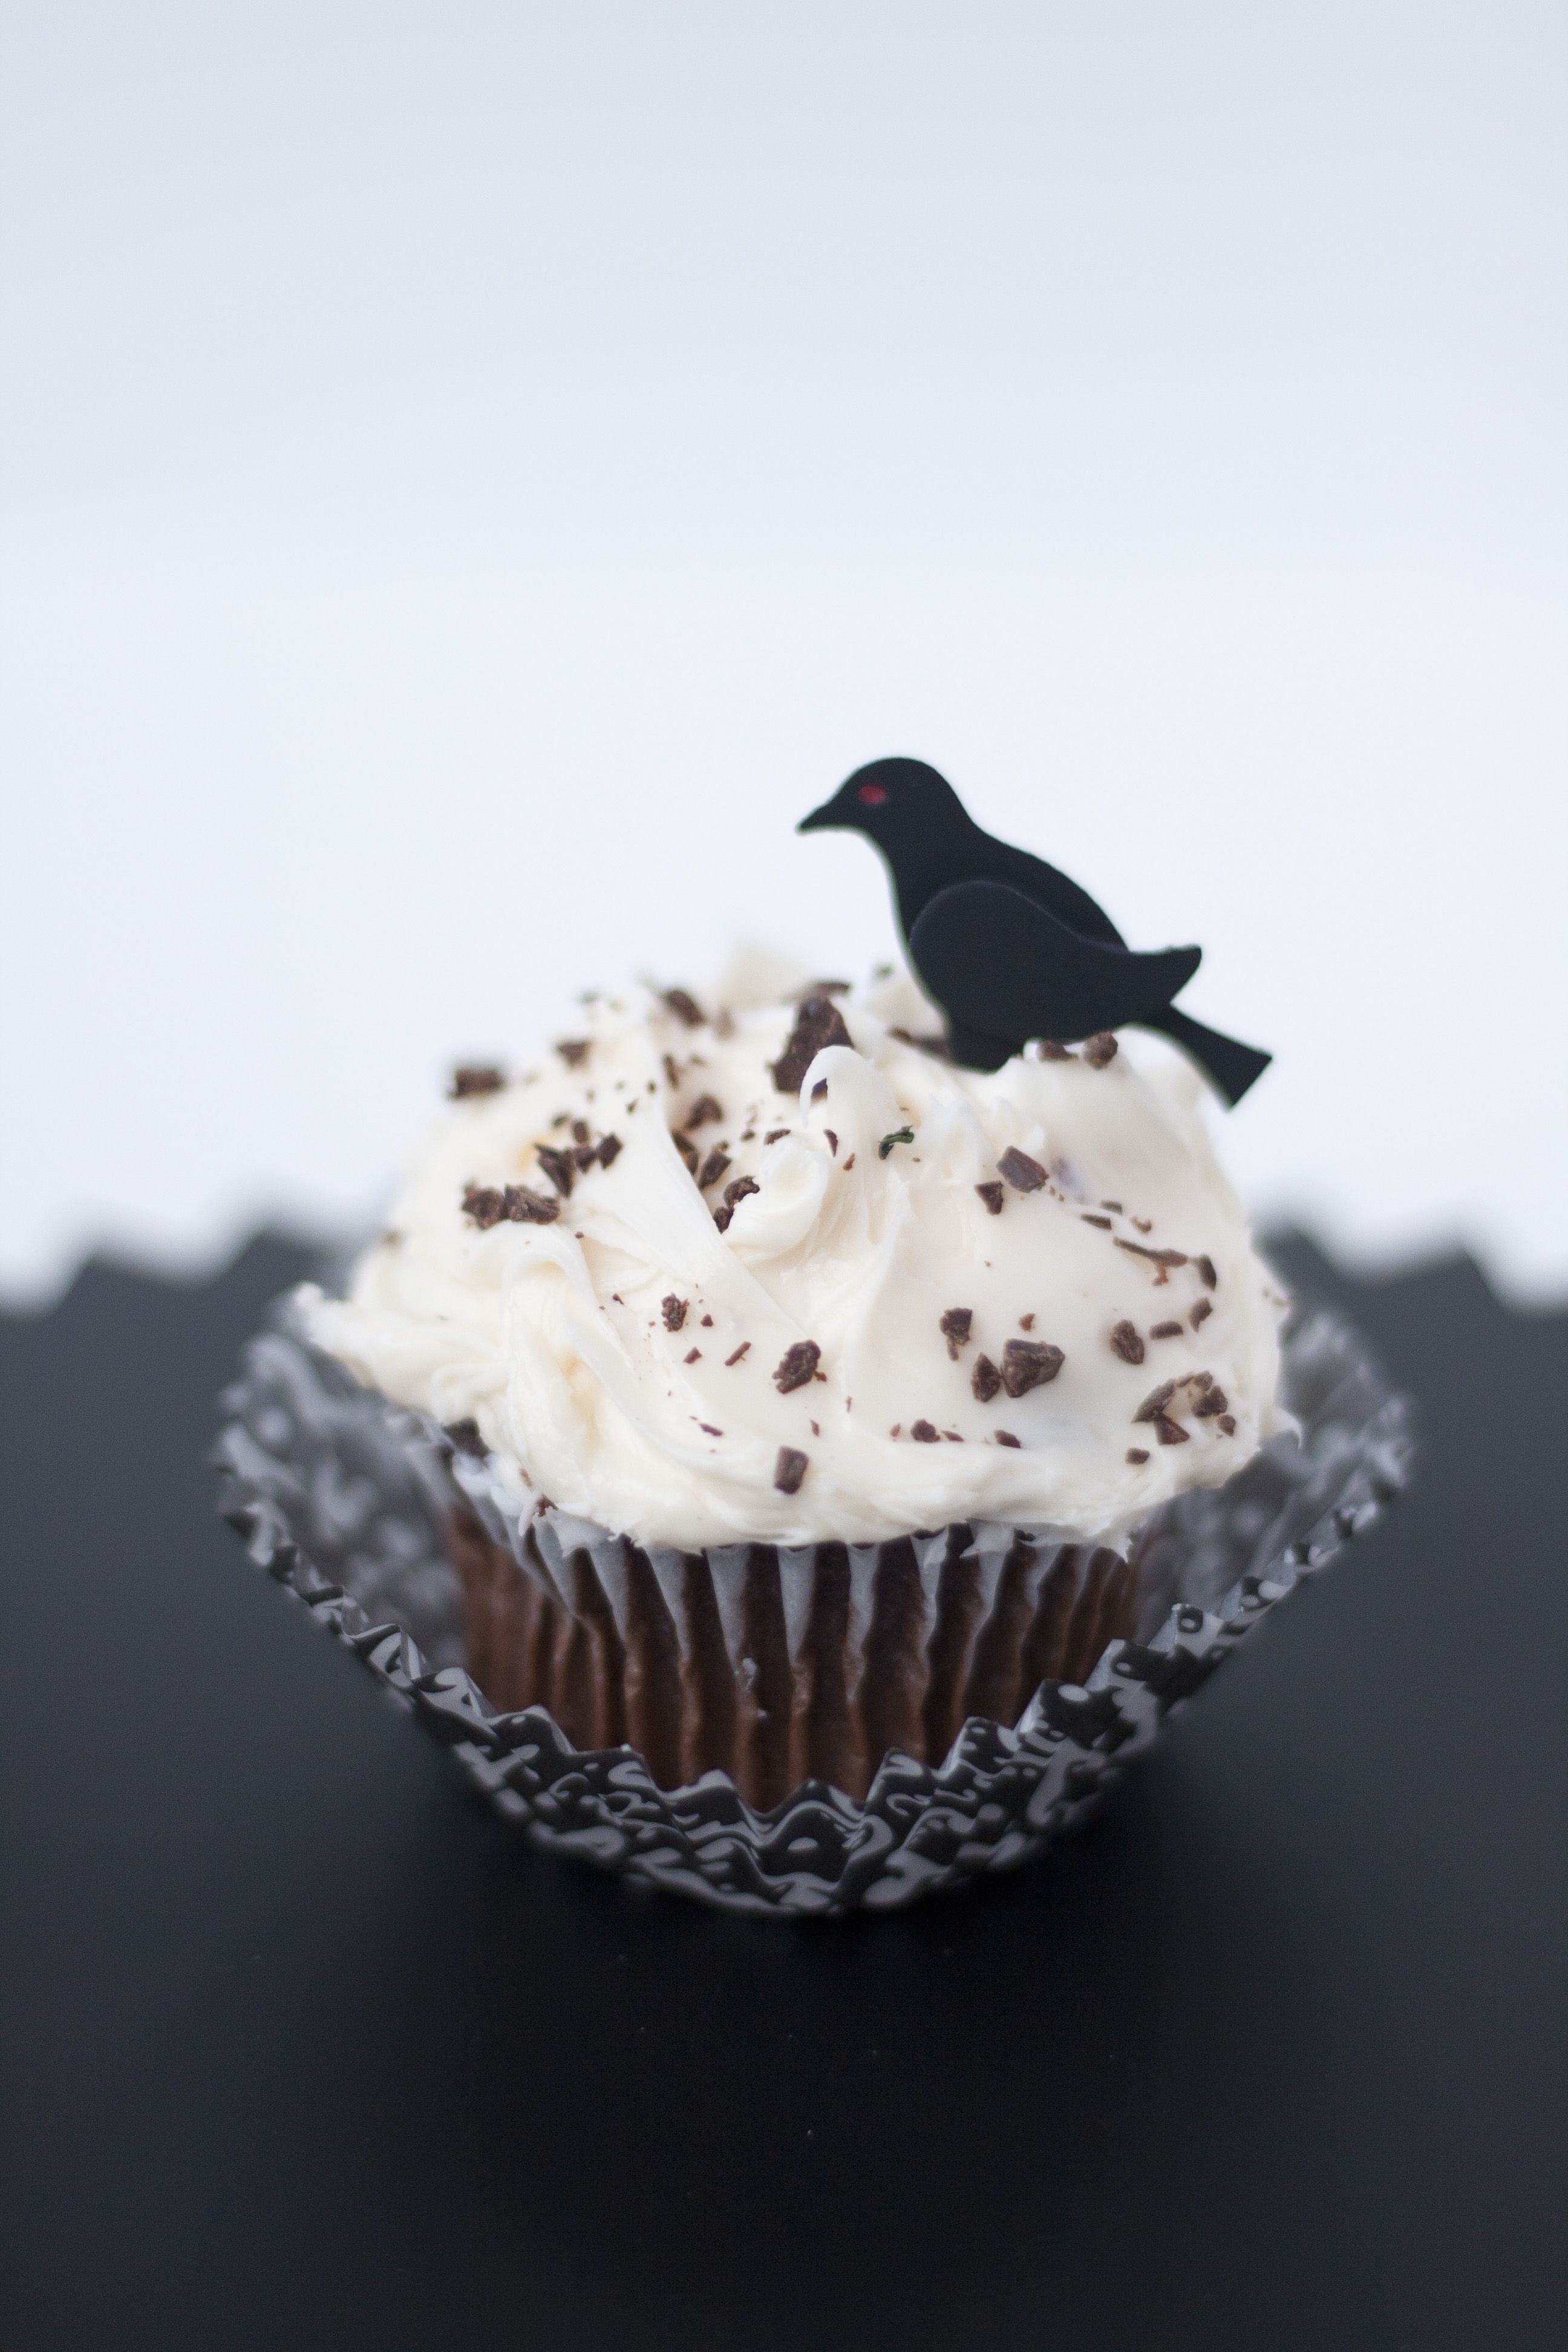 Papercraft Cupcake Idea to Make My Own Cute Quick and Easy Halloween Cupcake topper